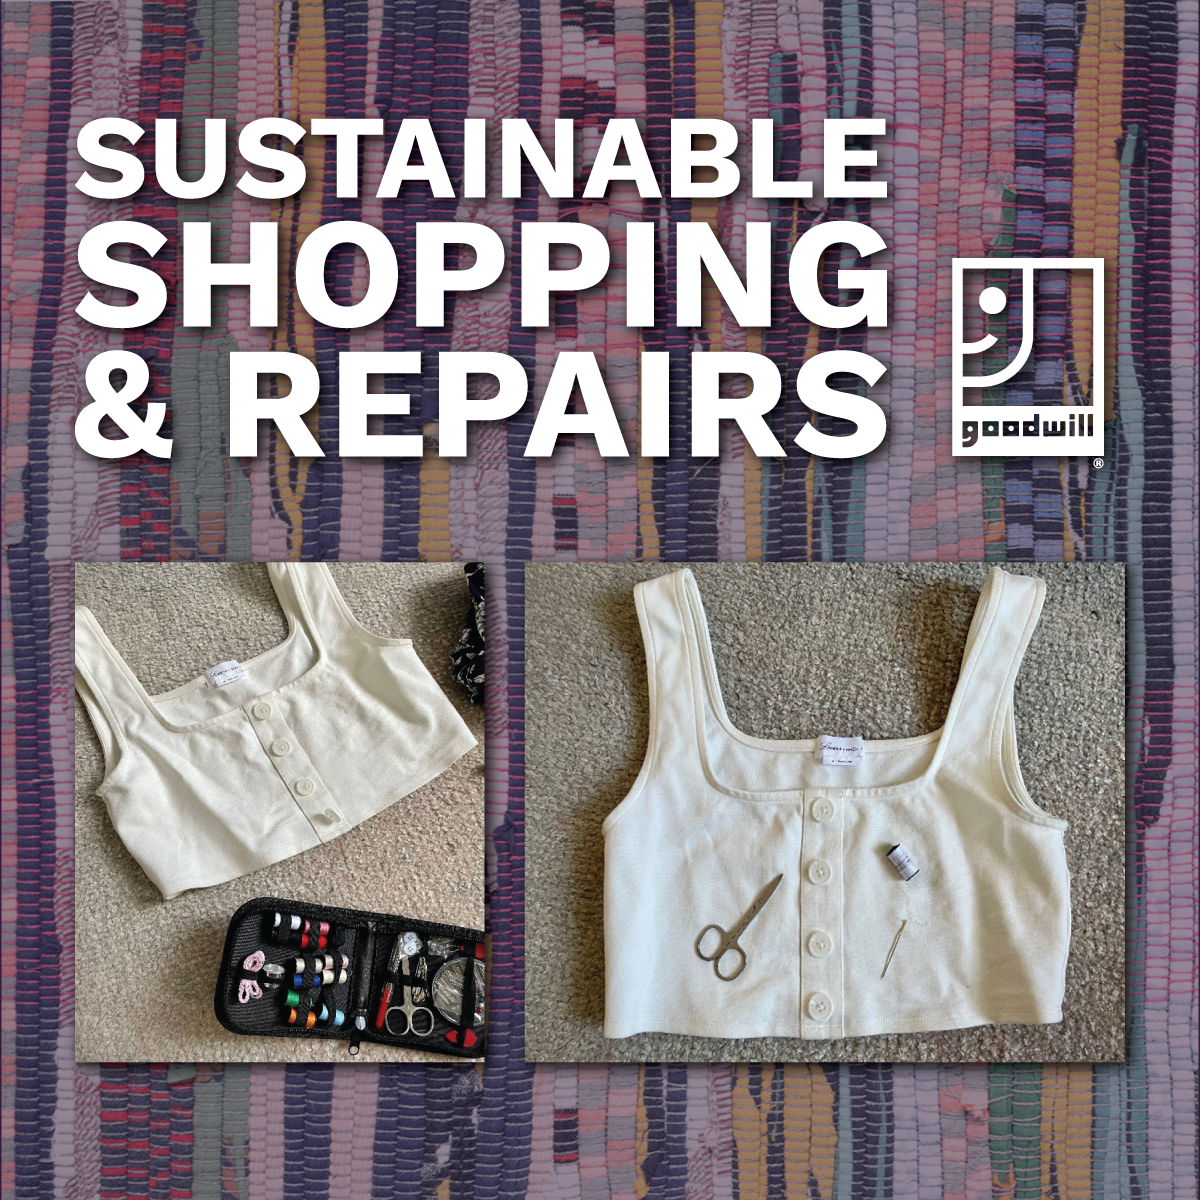 sustainable repairs - Why Sustainable Shopping Should Include Repairs